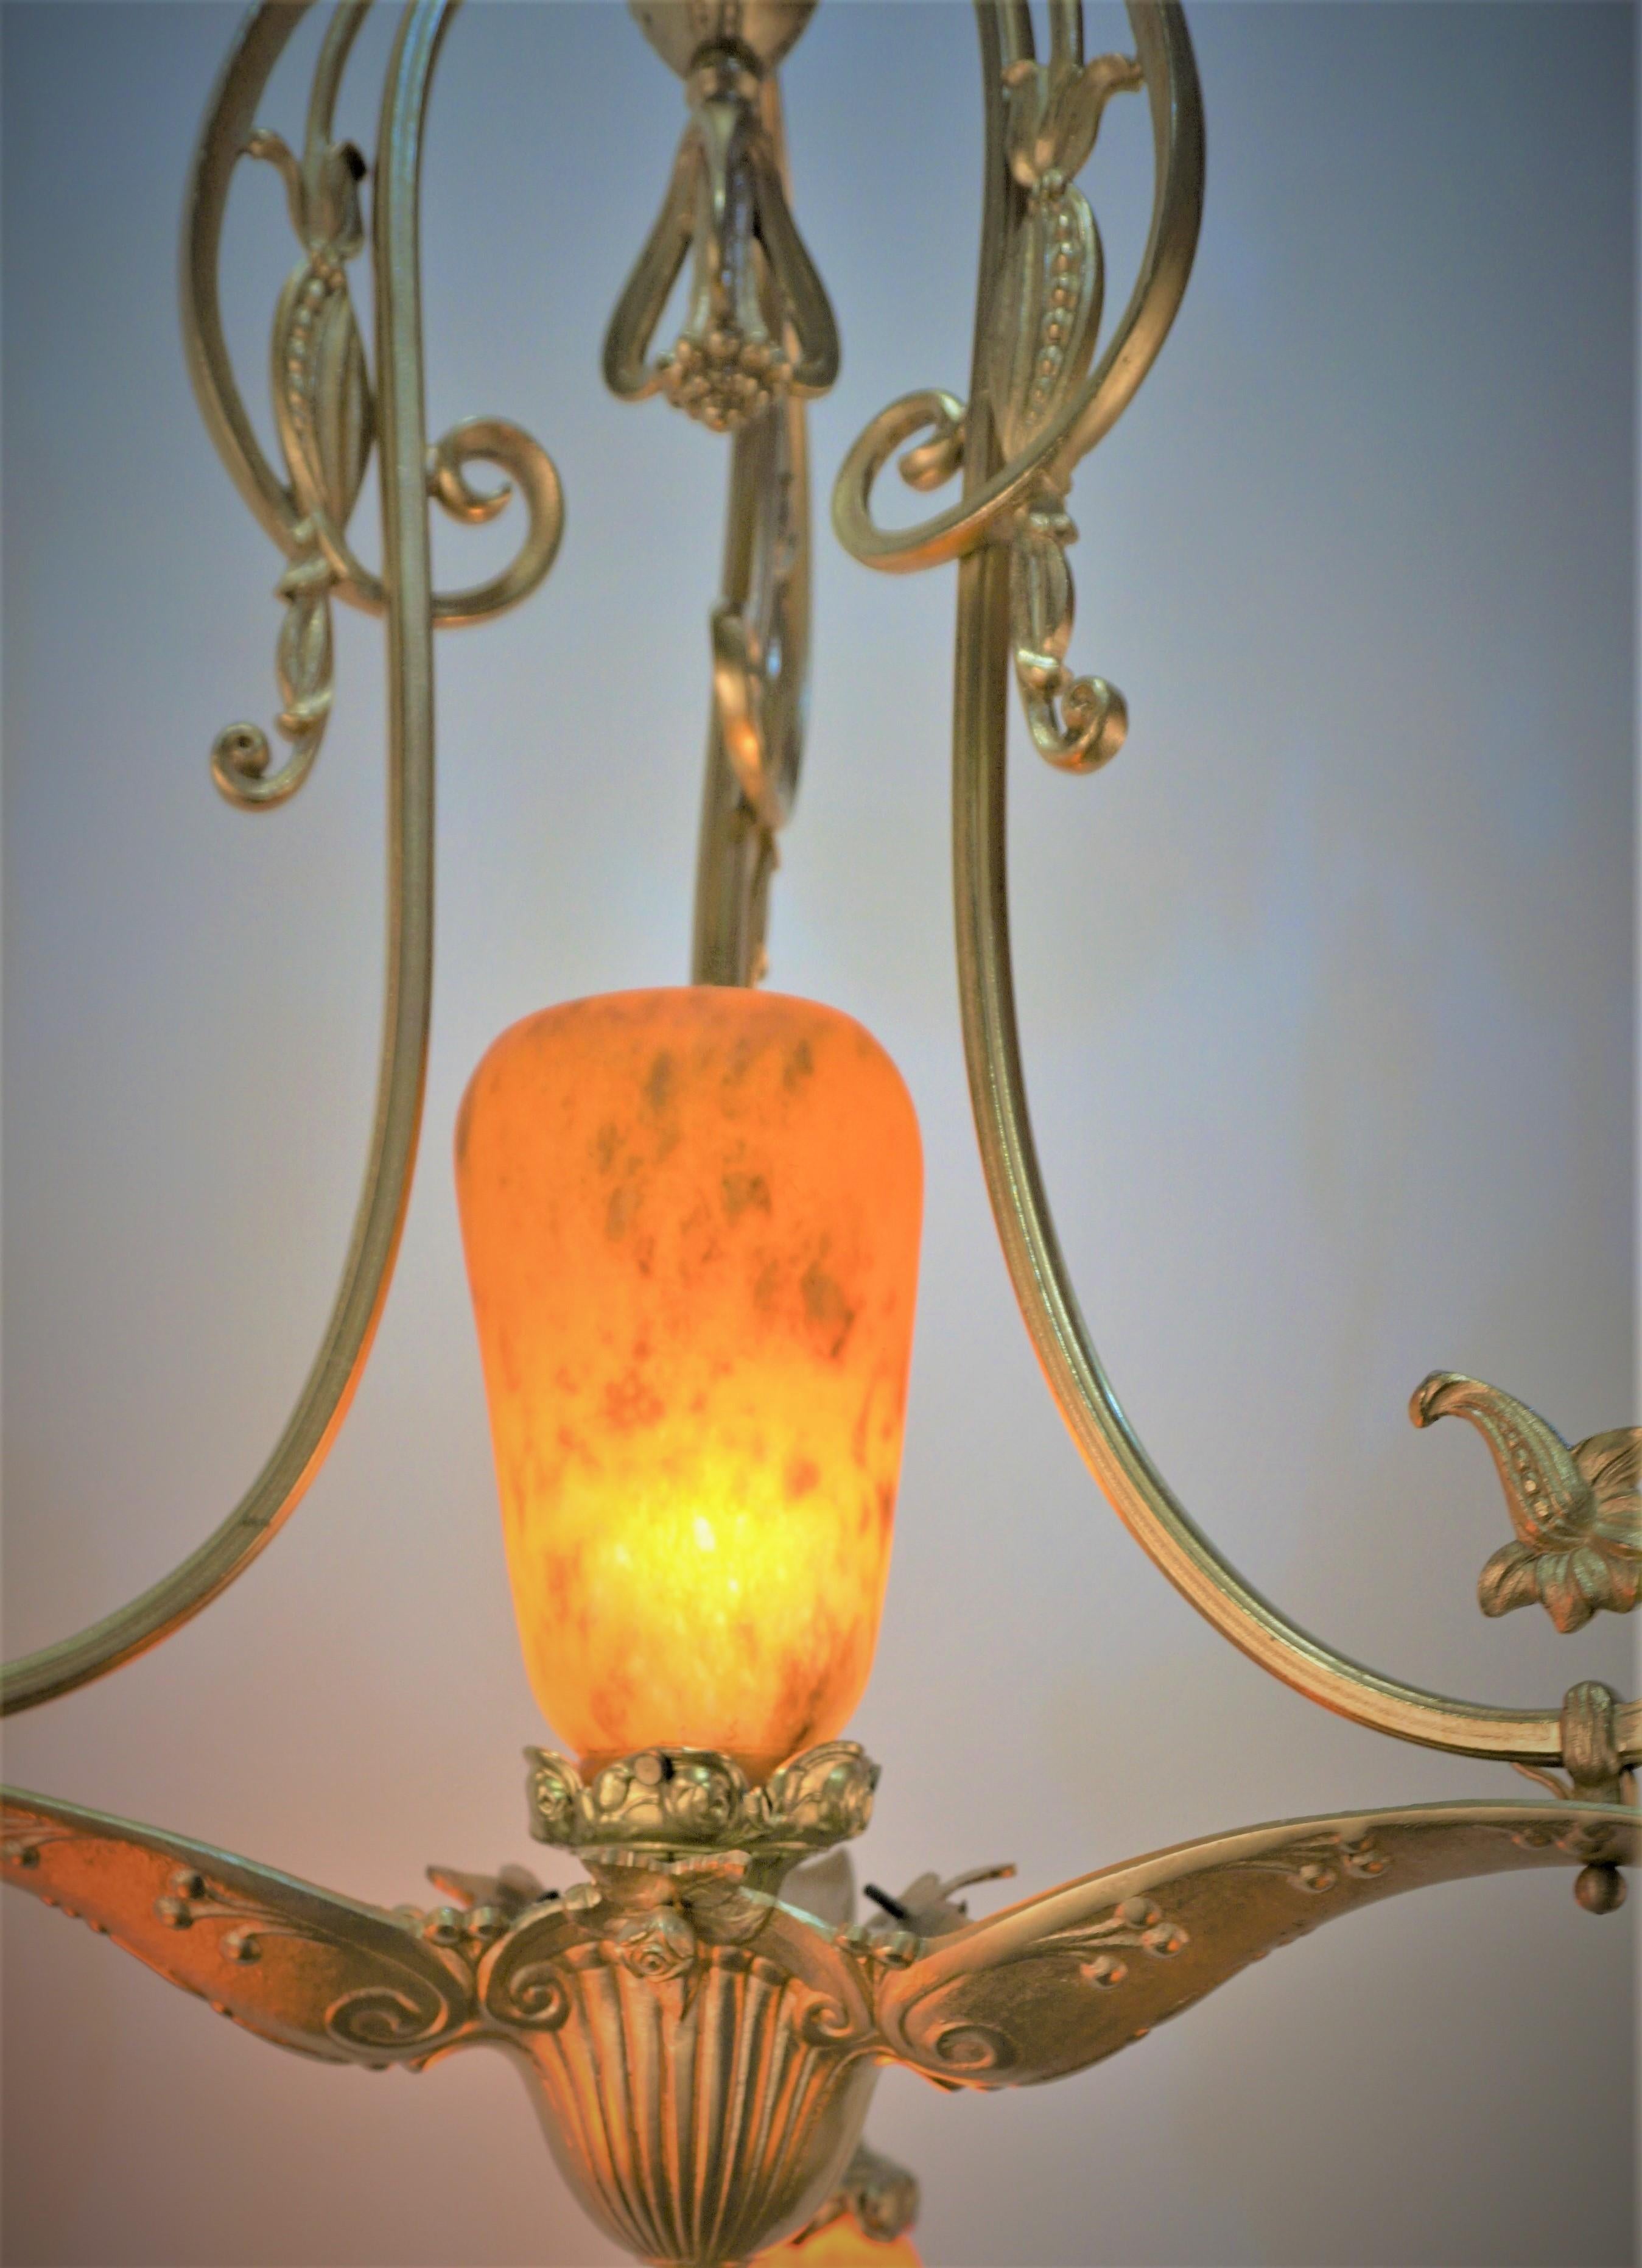 Beautiful hand blow glass with elegant bronze frame c1920's French art deco chandelier by Daum Nancy.
Professionally rewired and ready for installation.